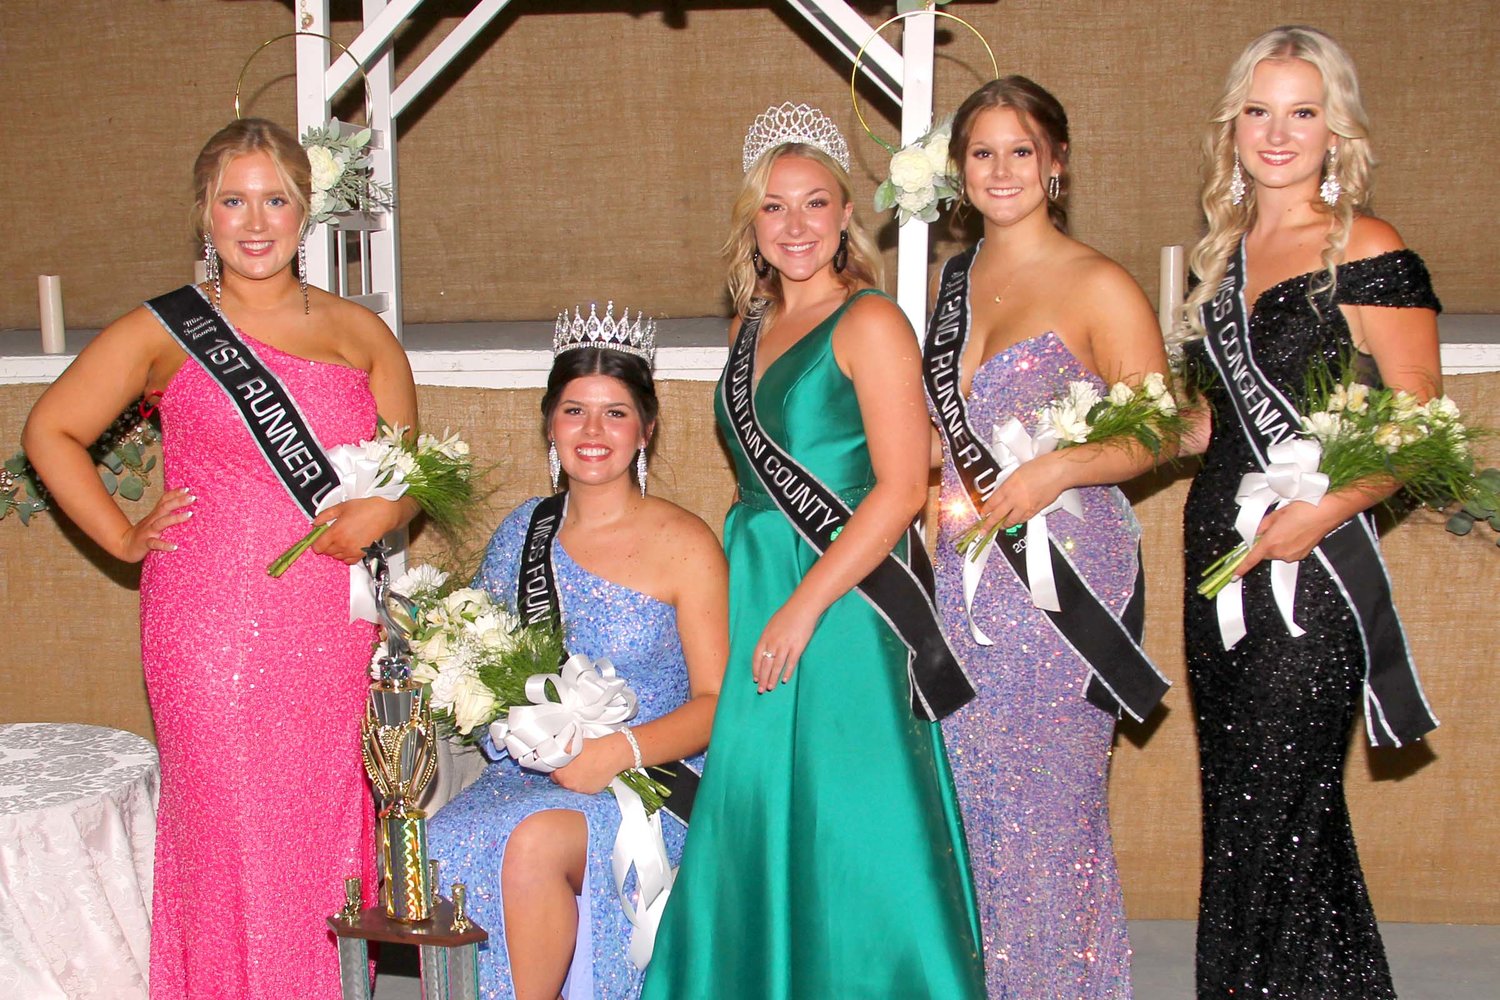 2022 Fountain County Queen's Court From L-R: 1st Runner-Up Aubrey Stonecipher, Queen Ella Peterson, 2021 Queen Paige Scheurich, 2022 2nd Runner-up Shy Rahm, Miss Congeniality & Miss Photogenic Audrey Galloway